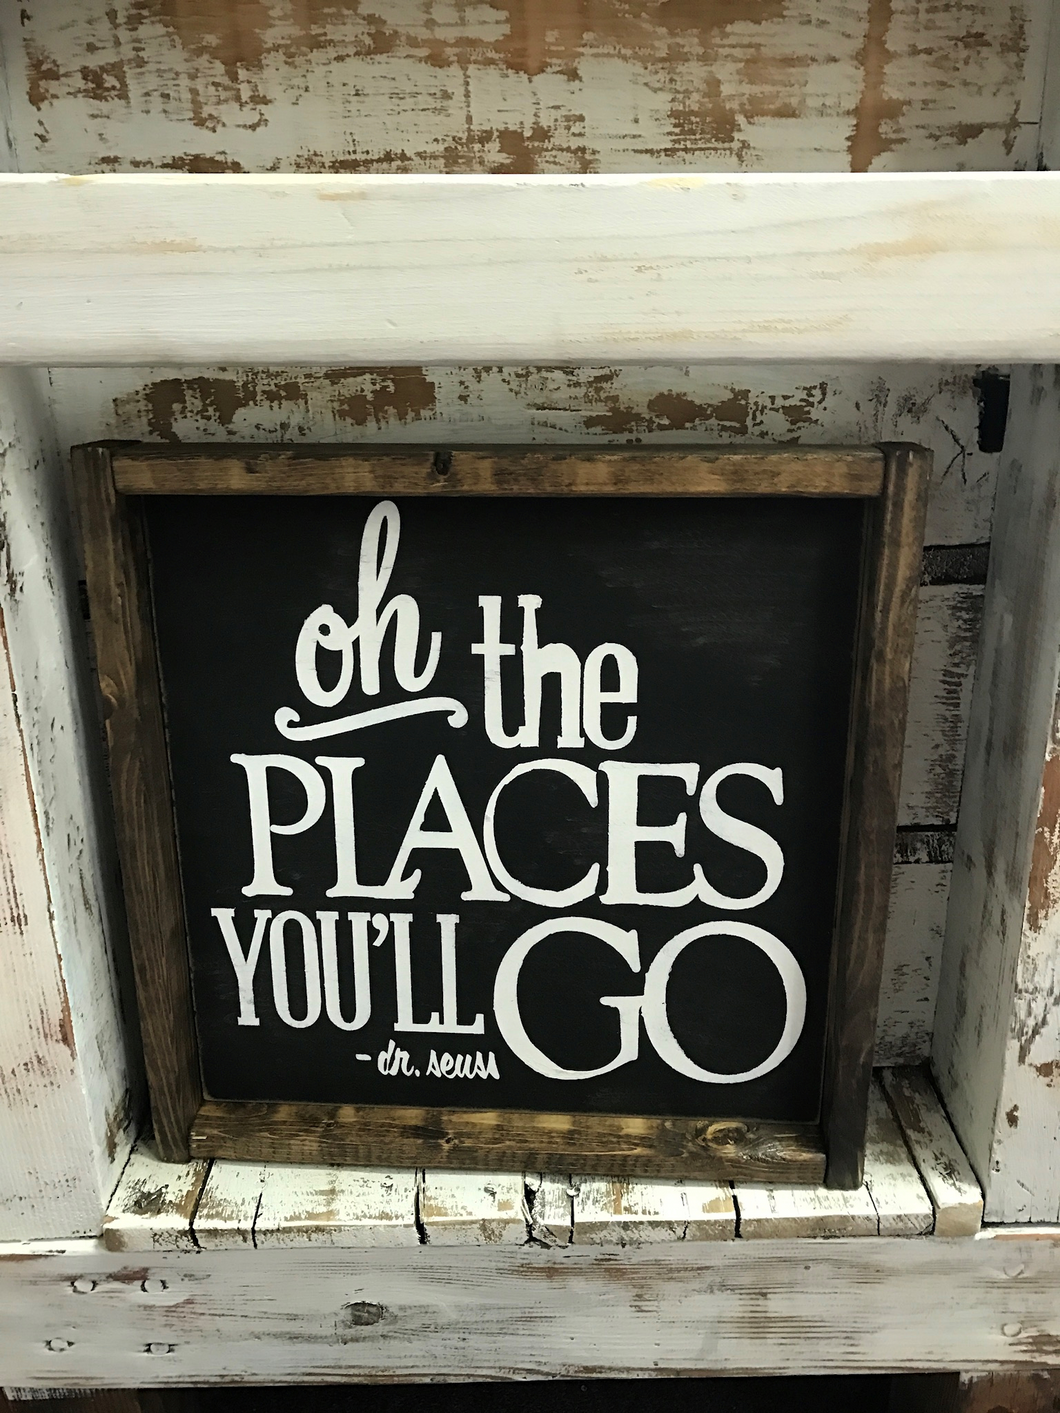 Oh the Places you'll Go -Dr. Seuss